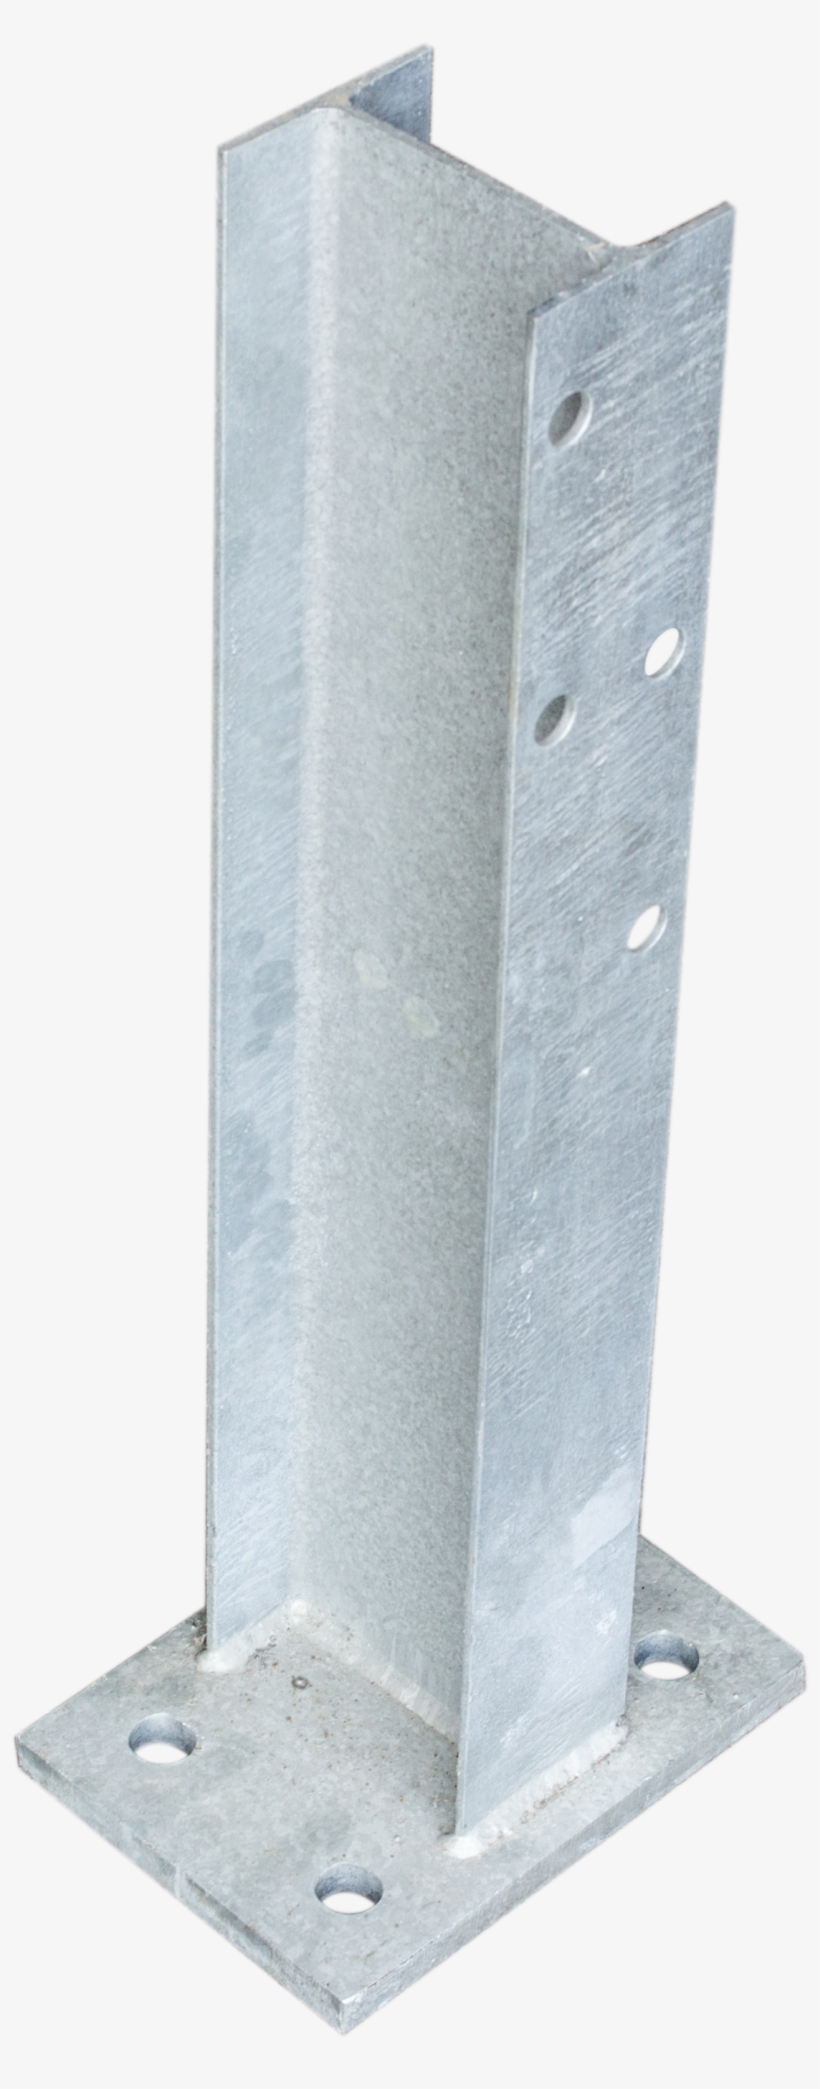 Base Plated Post - Tool, transparent png #6035089